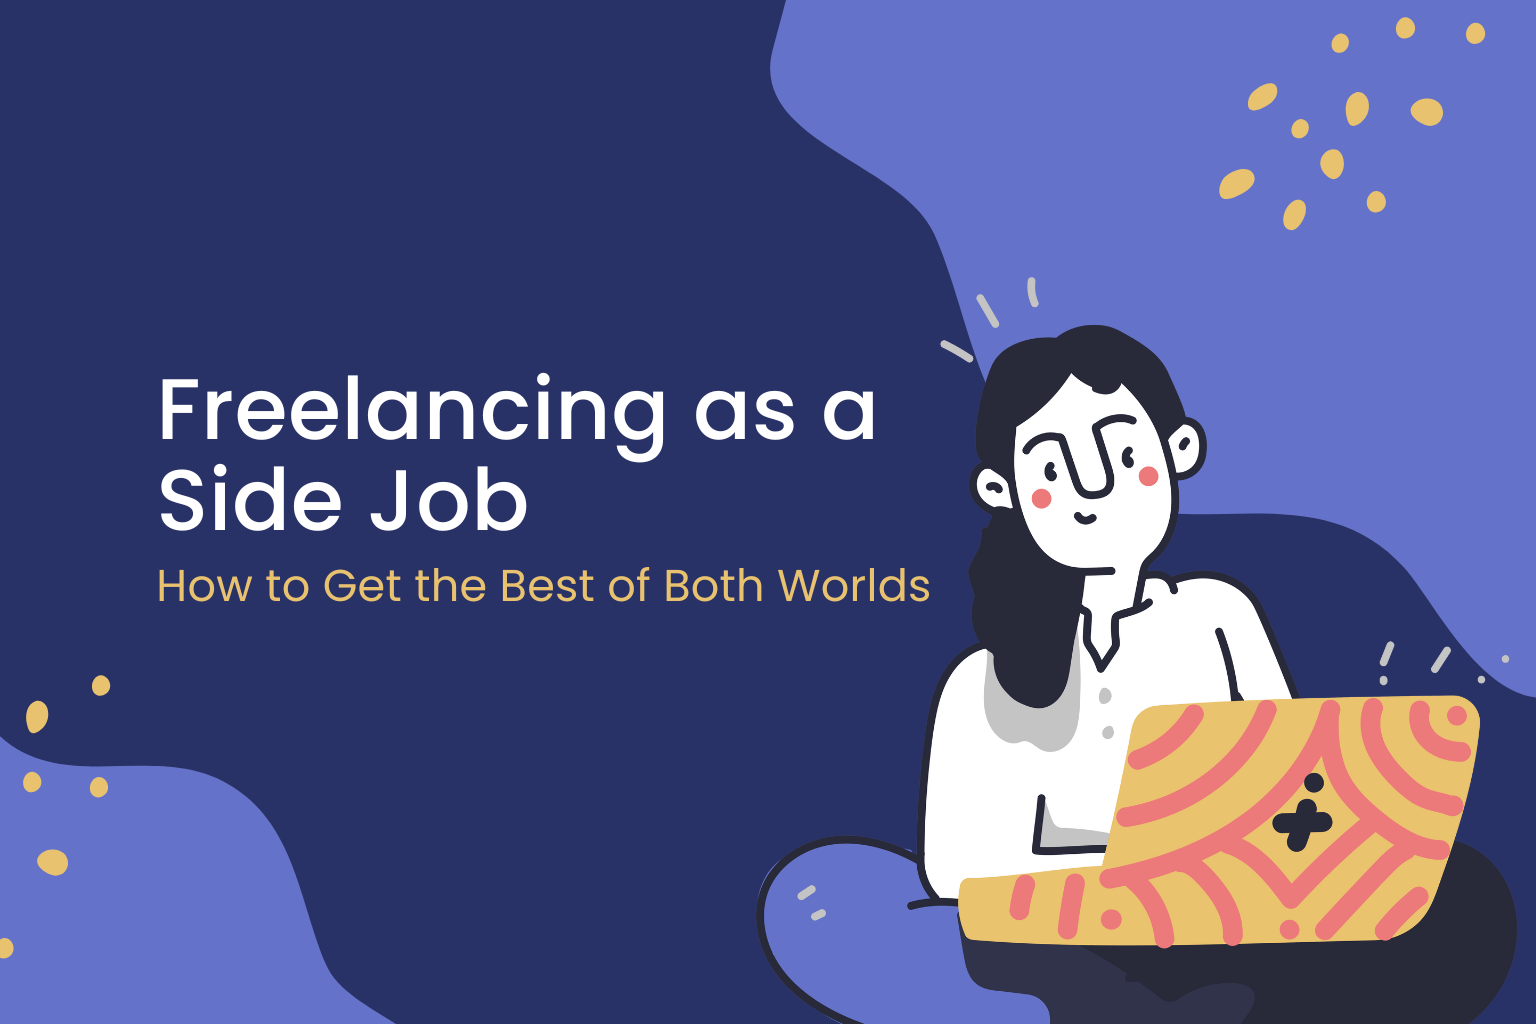 Freelancing as a Side Job – How to Get the Best of Both Worlds